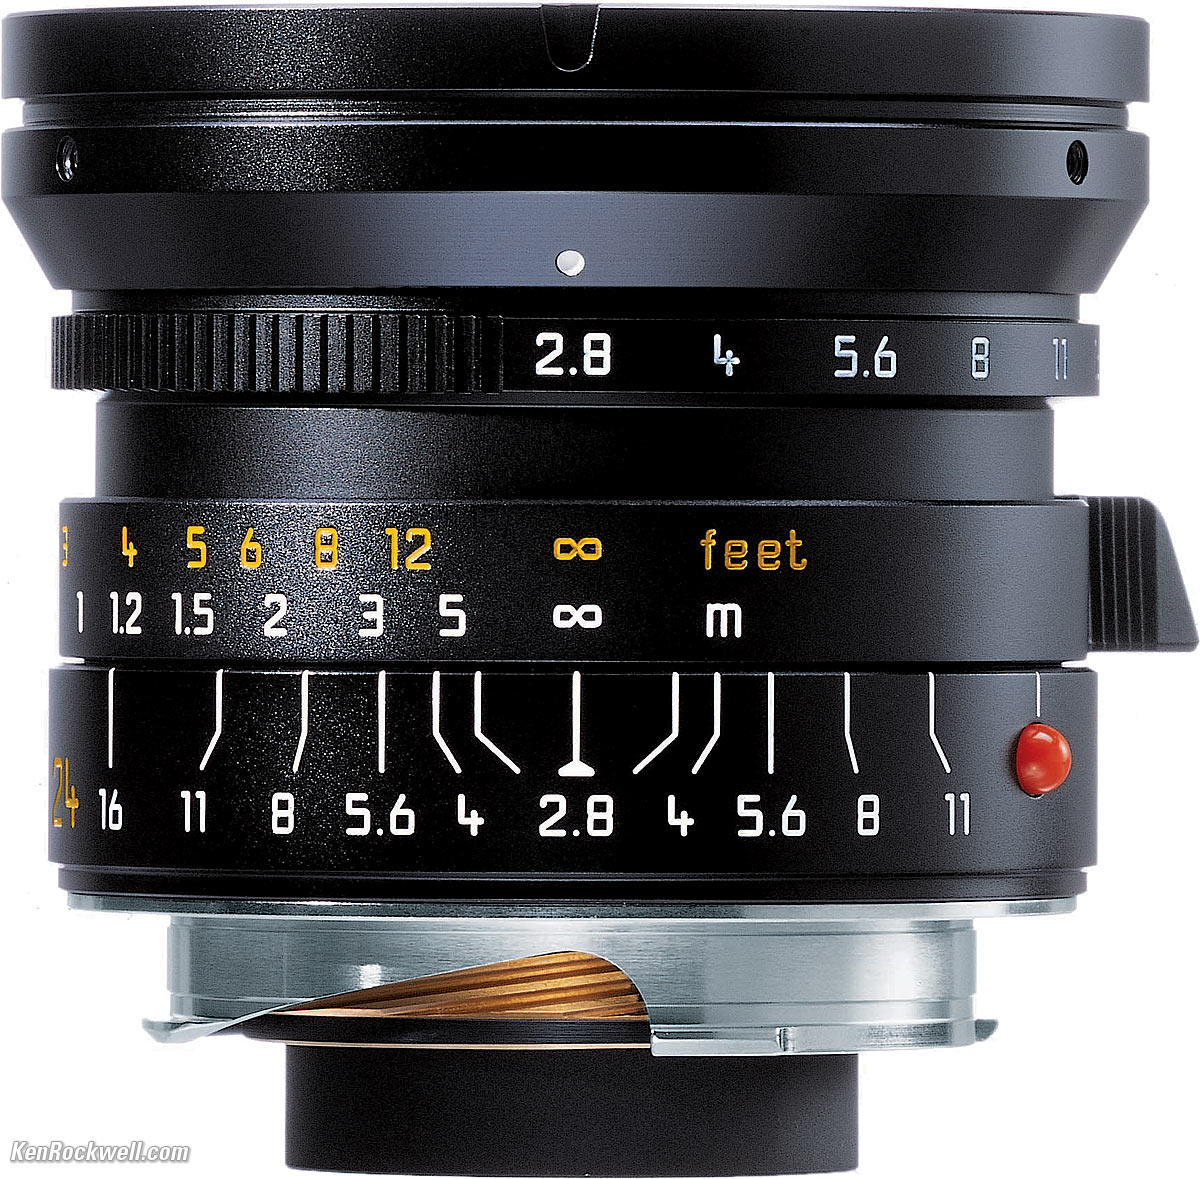 Leica summicron r 50mm f2 serial numbers